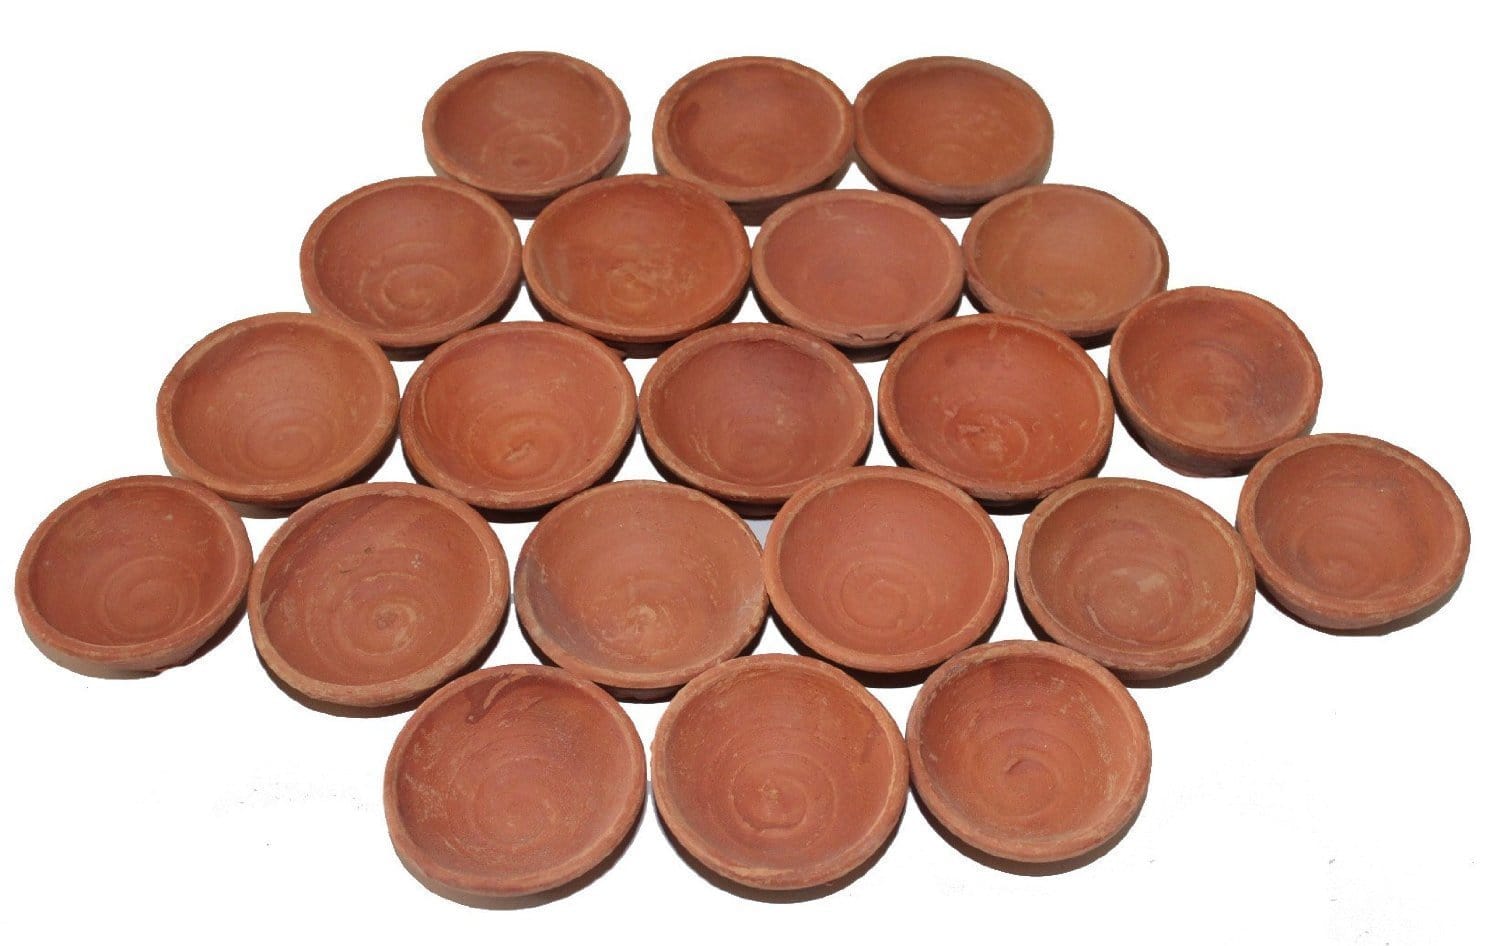 Om Craft Villa Diwali Handcrafted Clay Lamps (Brown) - Pack of 51 Pieces